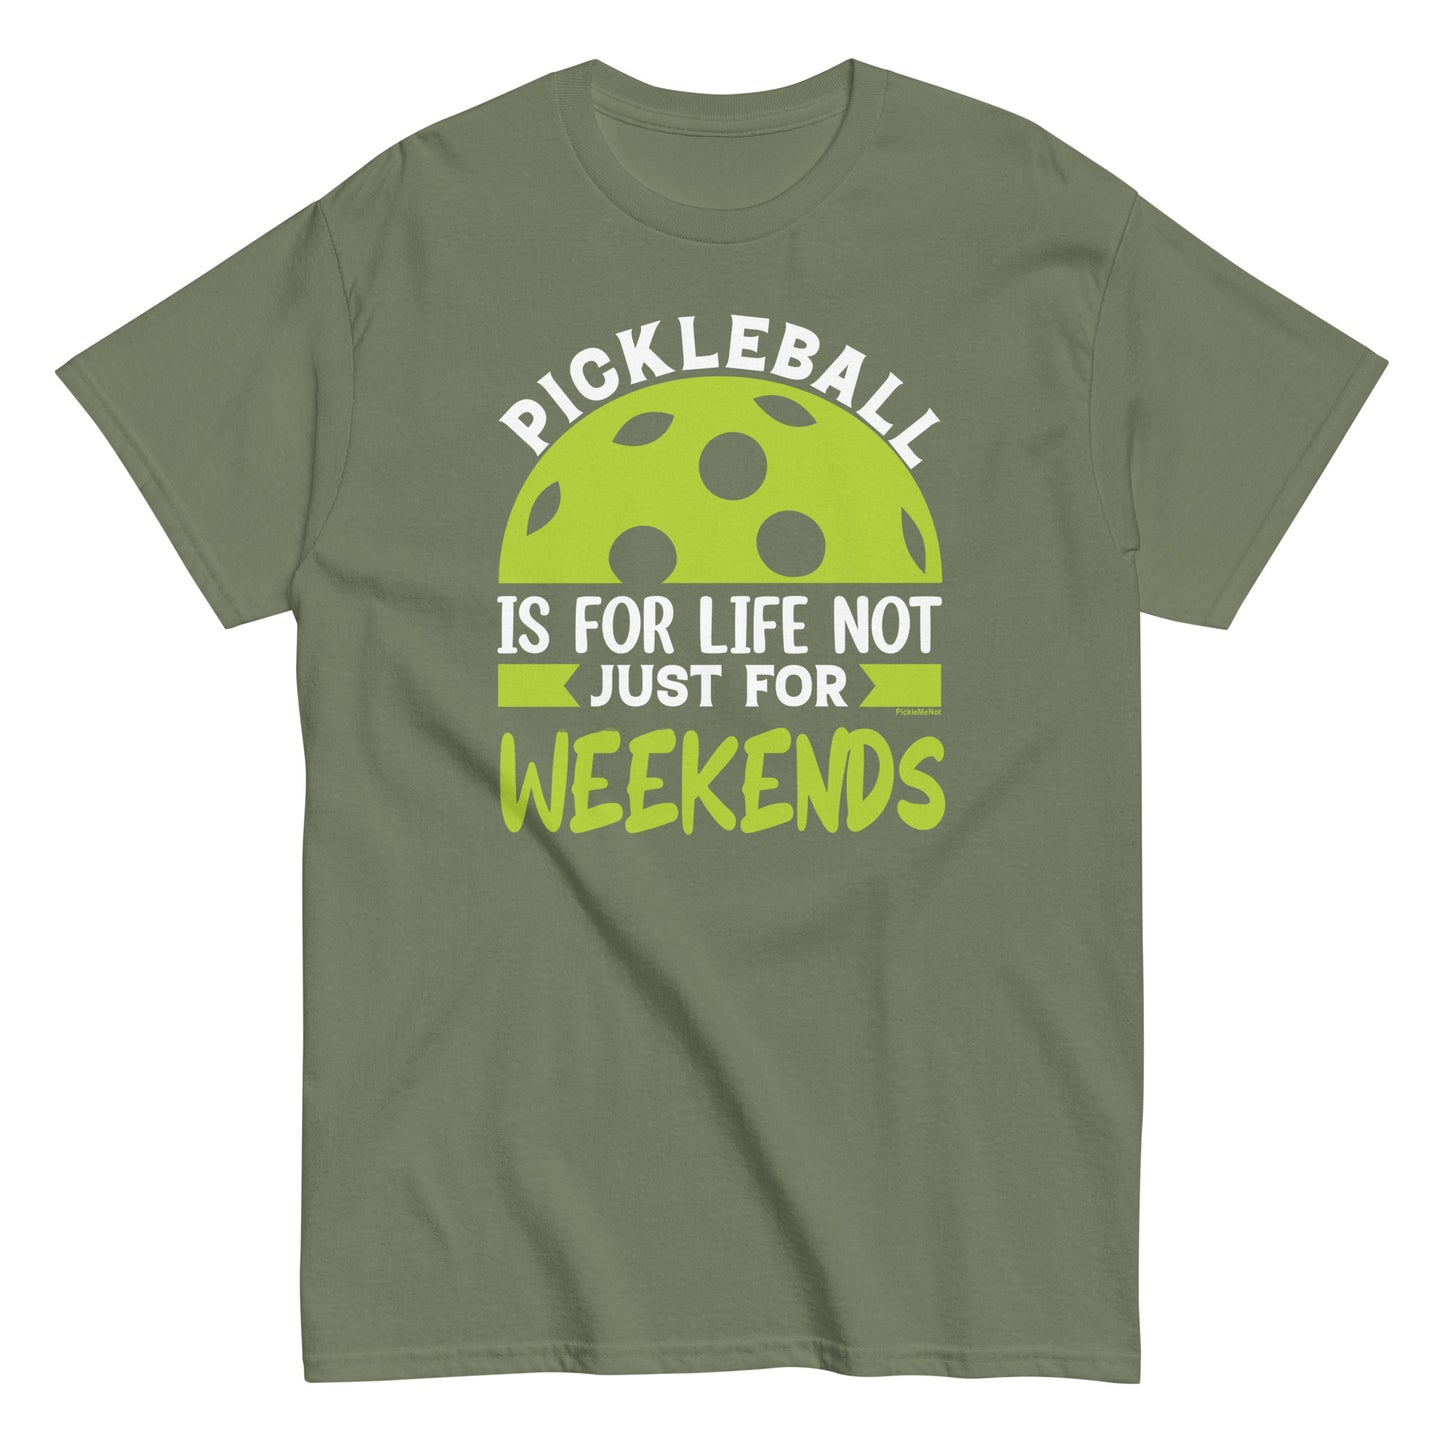 Fun Distressed Pickleball, "Pickleball Is For Life, Not Just The Weekend" Men's Classic  military Green ee